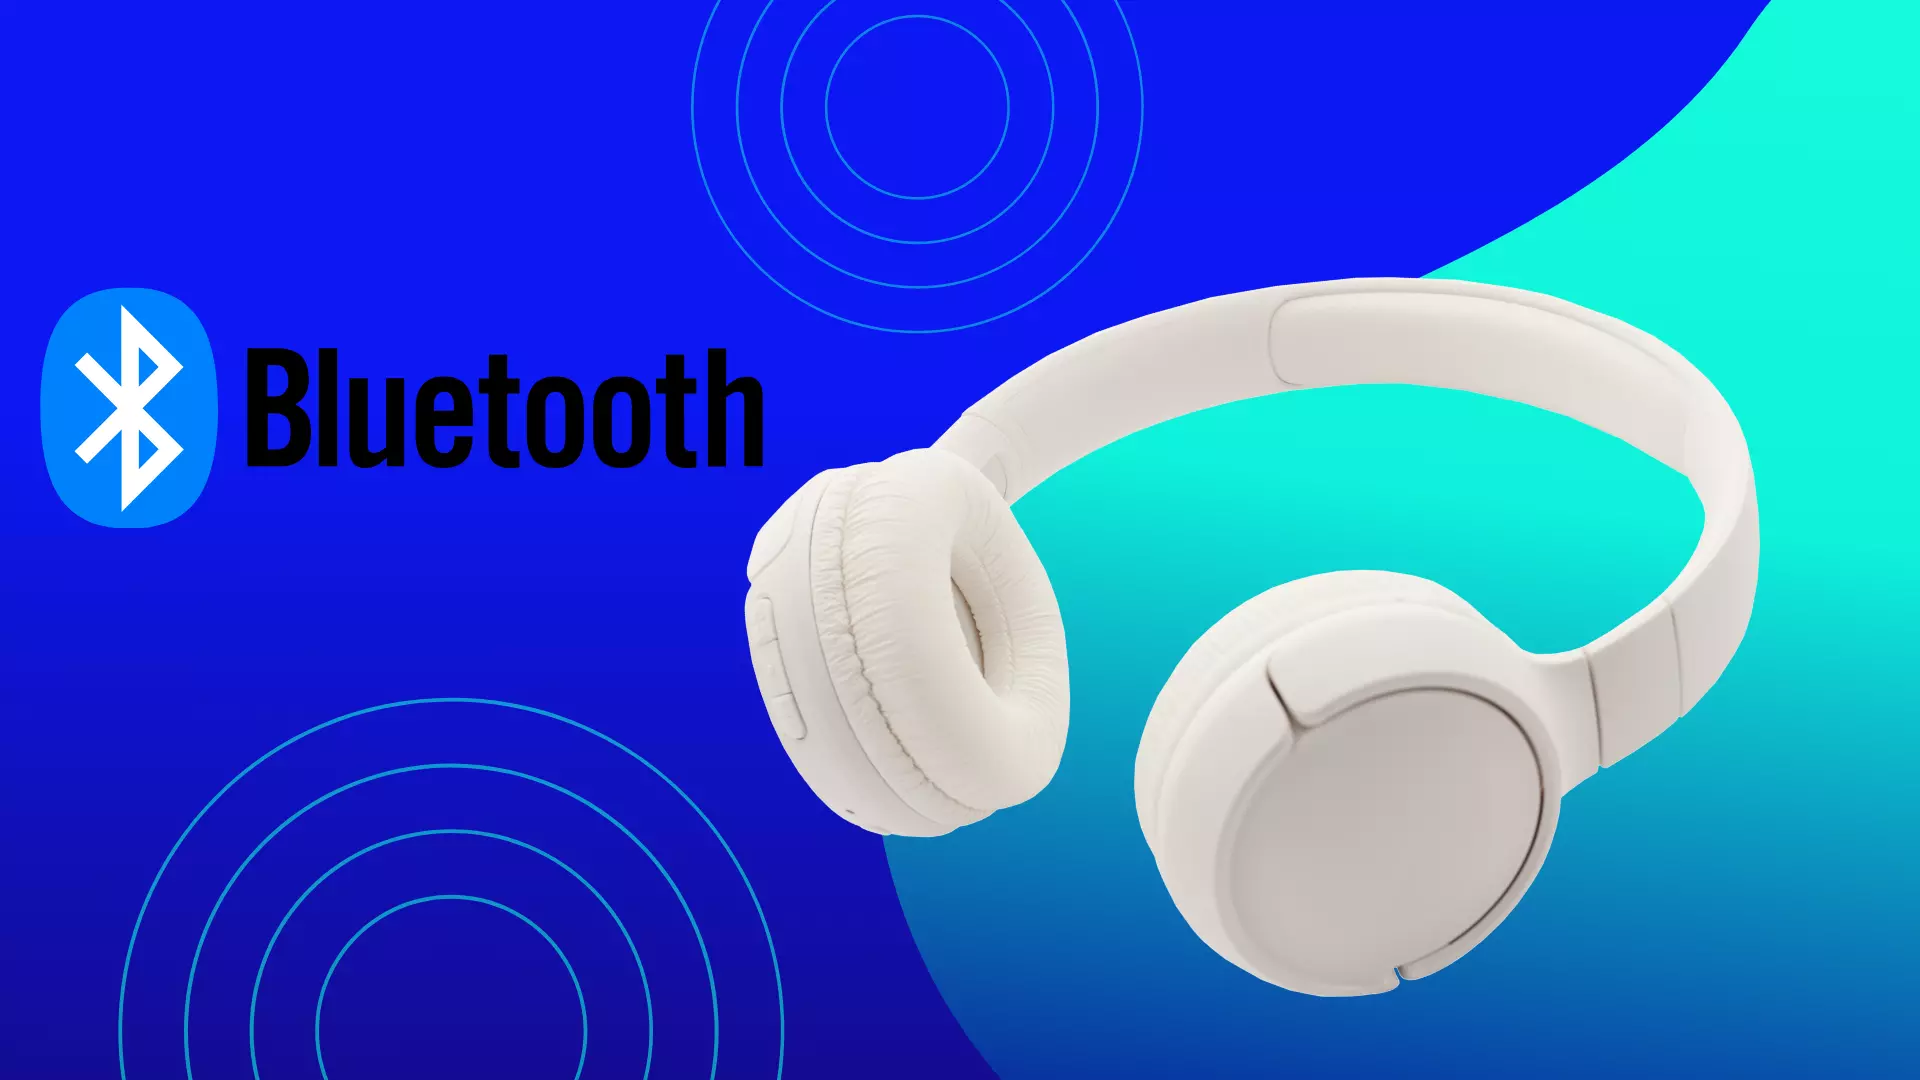 Wireless Bluetooth Devices